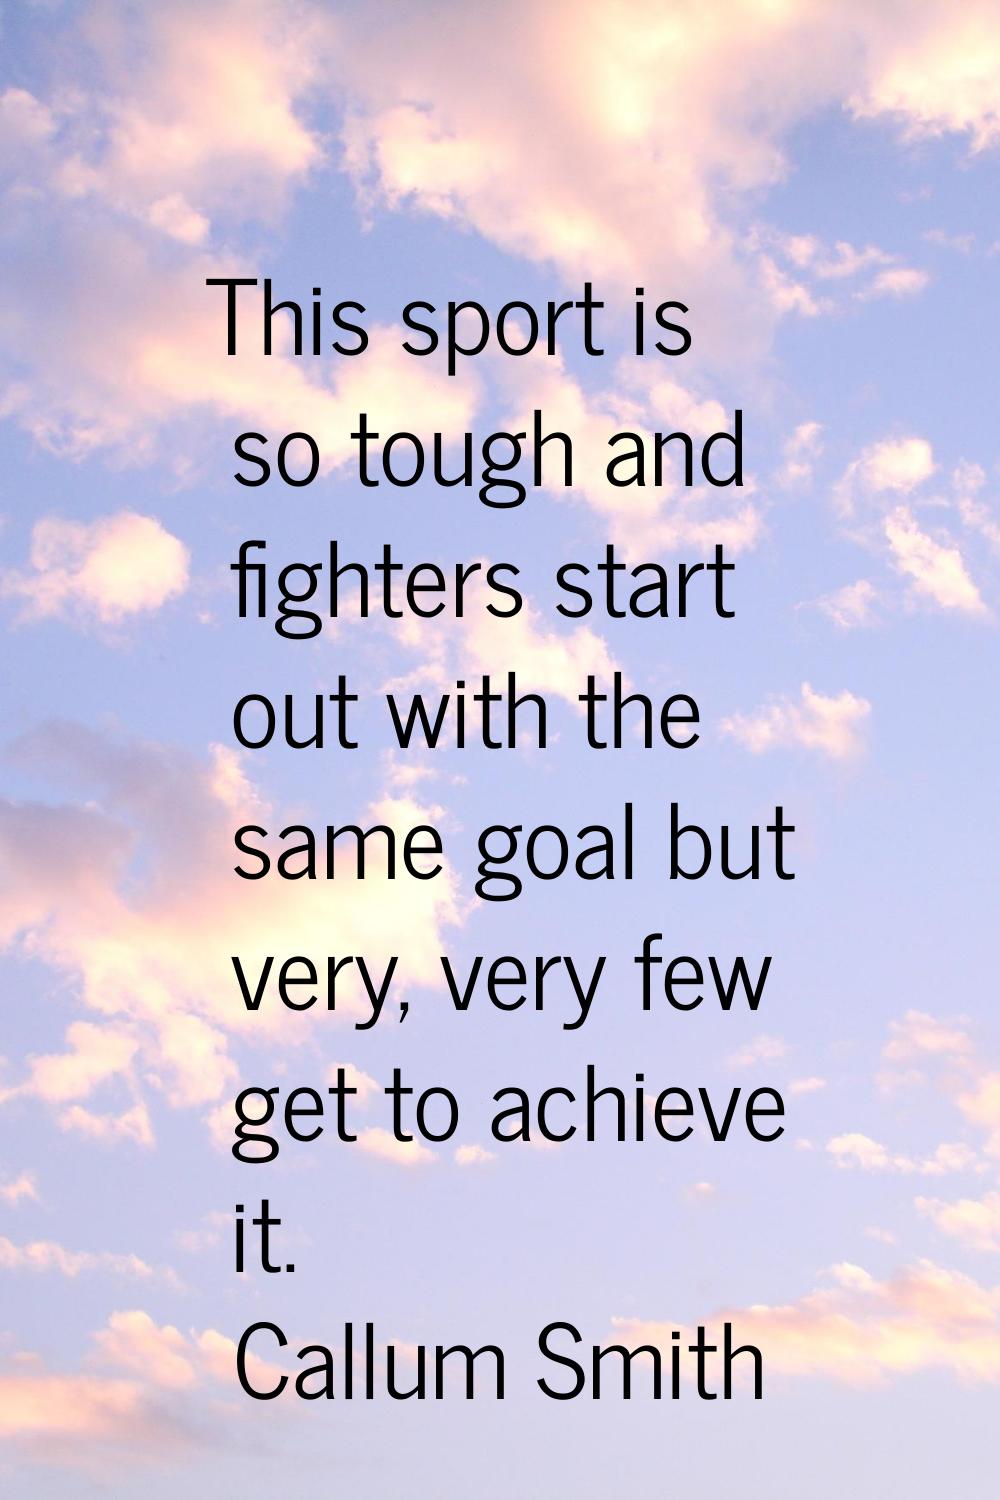 This sport is so tough and fighters start out with the same goal but very, very few get to achieve 